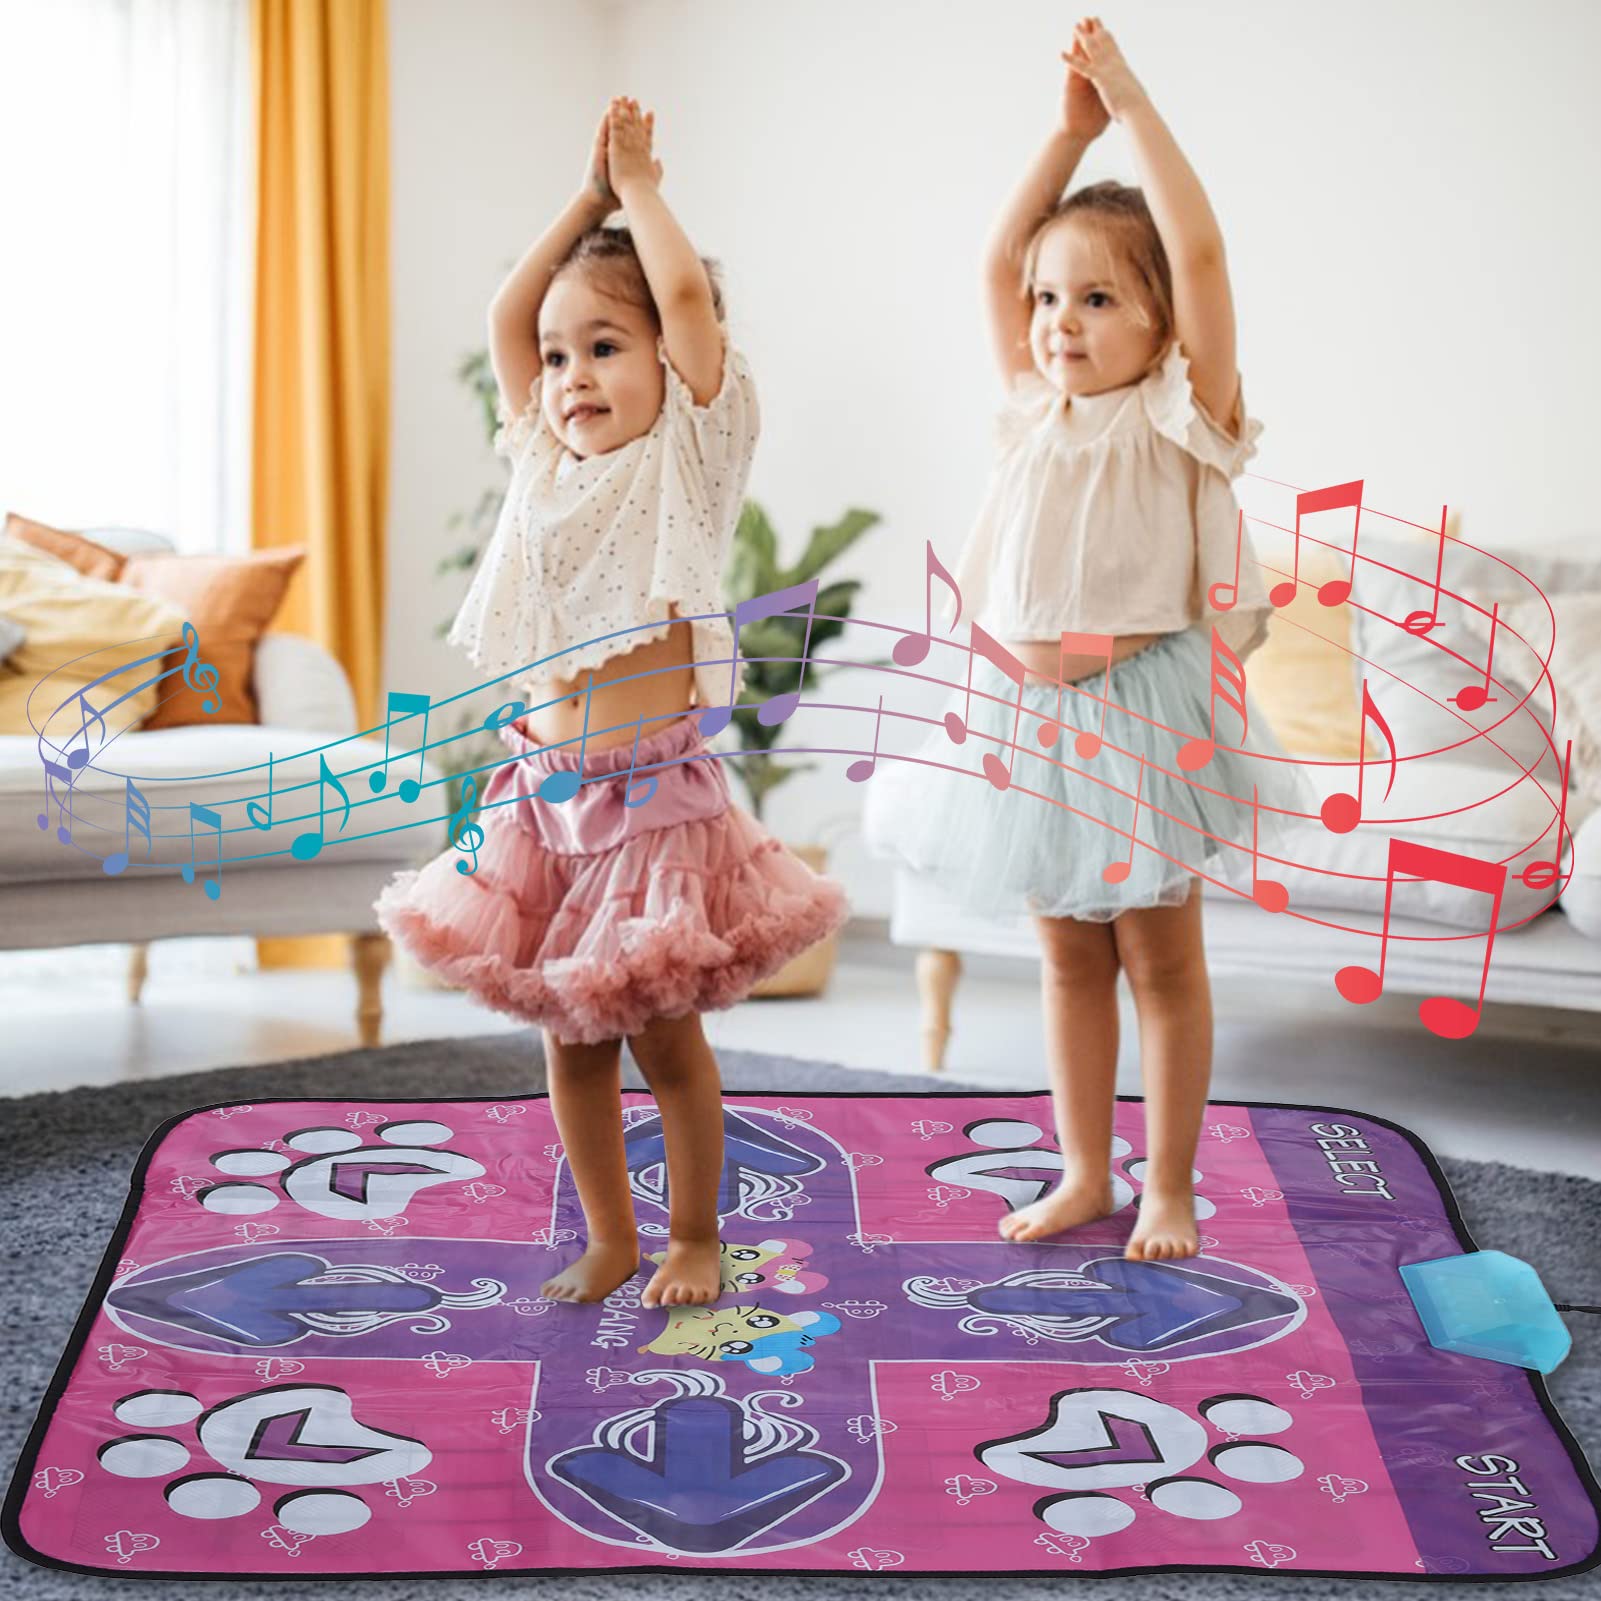 Pilipane Dance Mat,for 3 4 5 6 7 8 9 10 Year Old Girls Birthday Gifts,Dance Pad with LED Lights,Built in Music,HD AV Interface,Dance Game Toy Gift for Kids Girls Boys Birthday